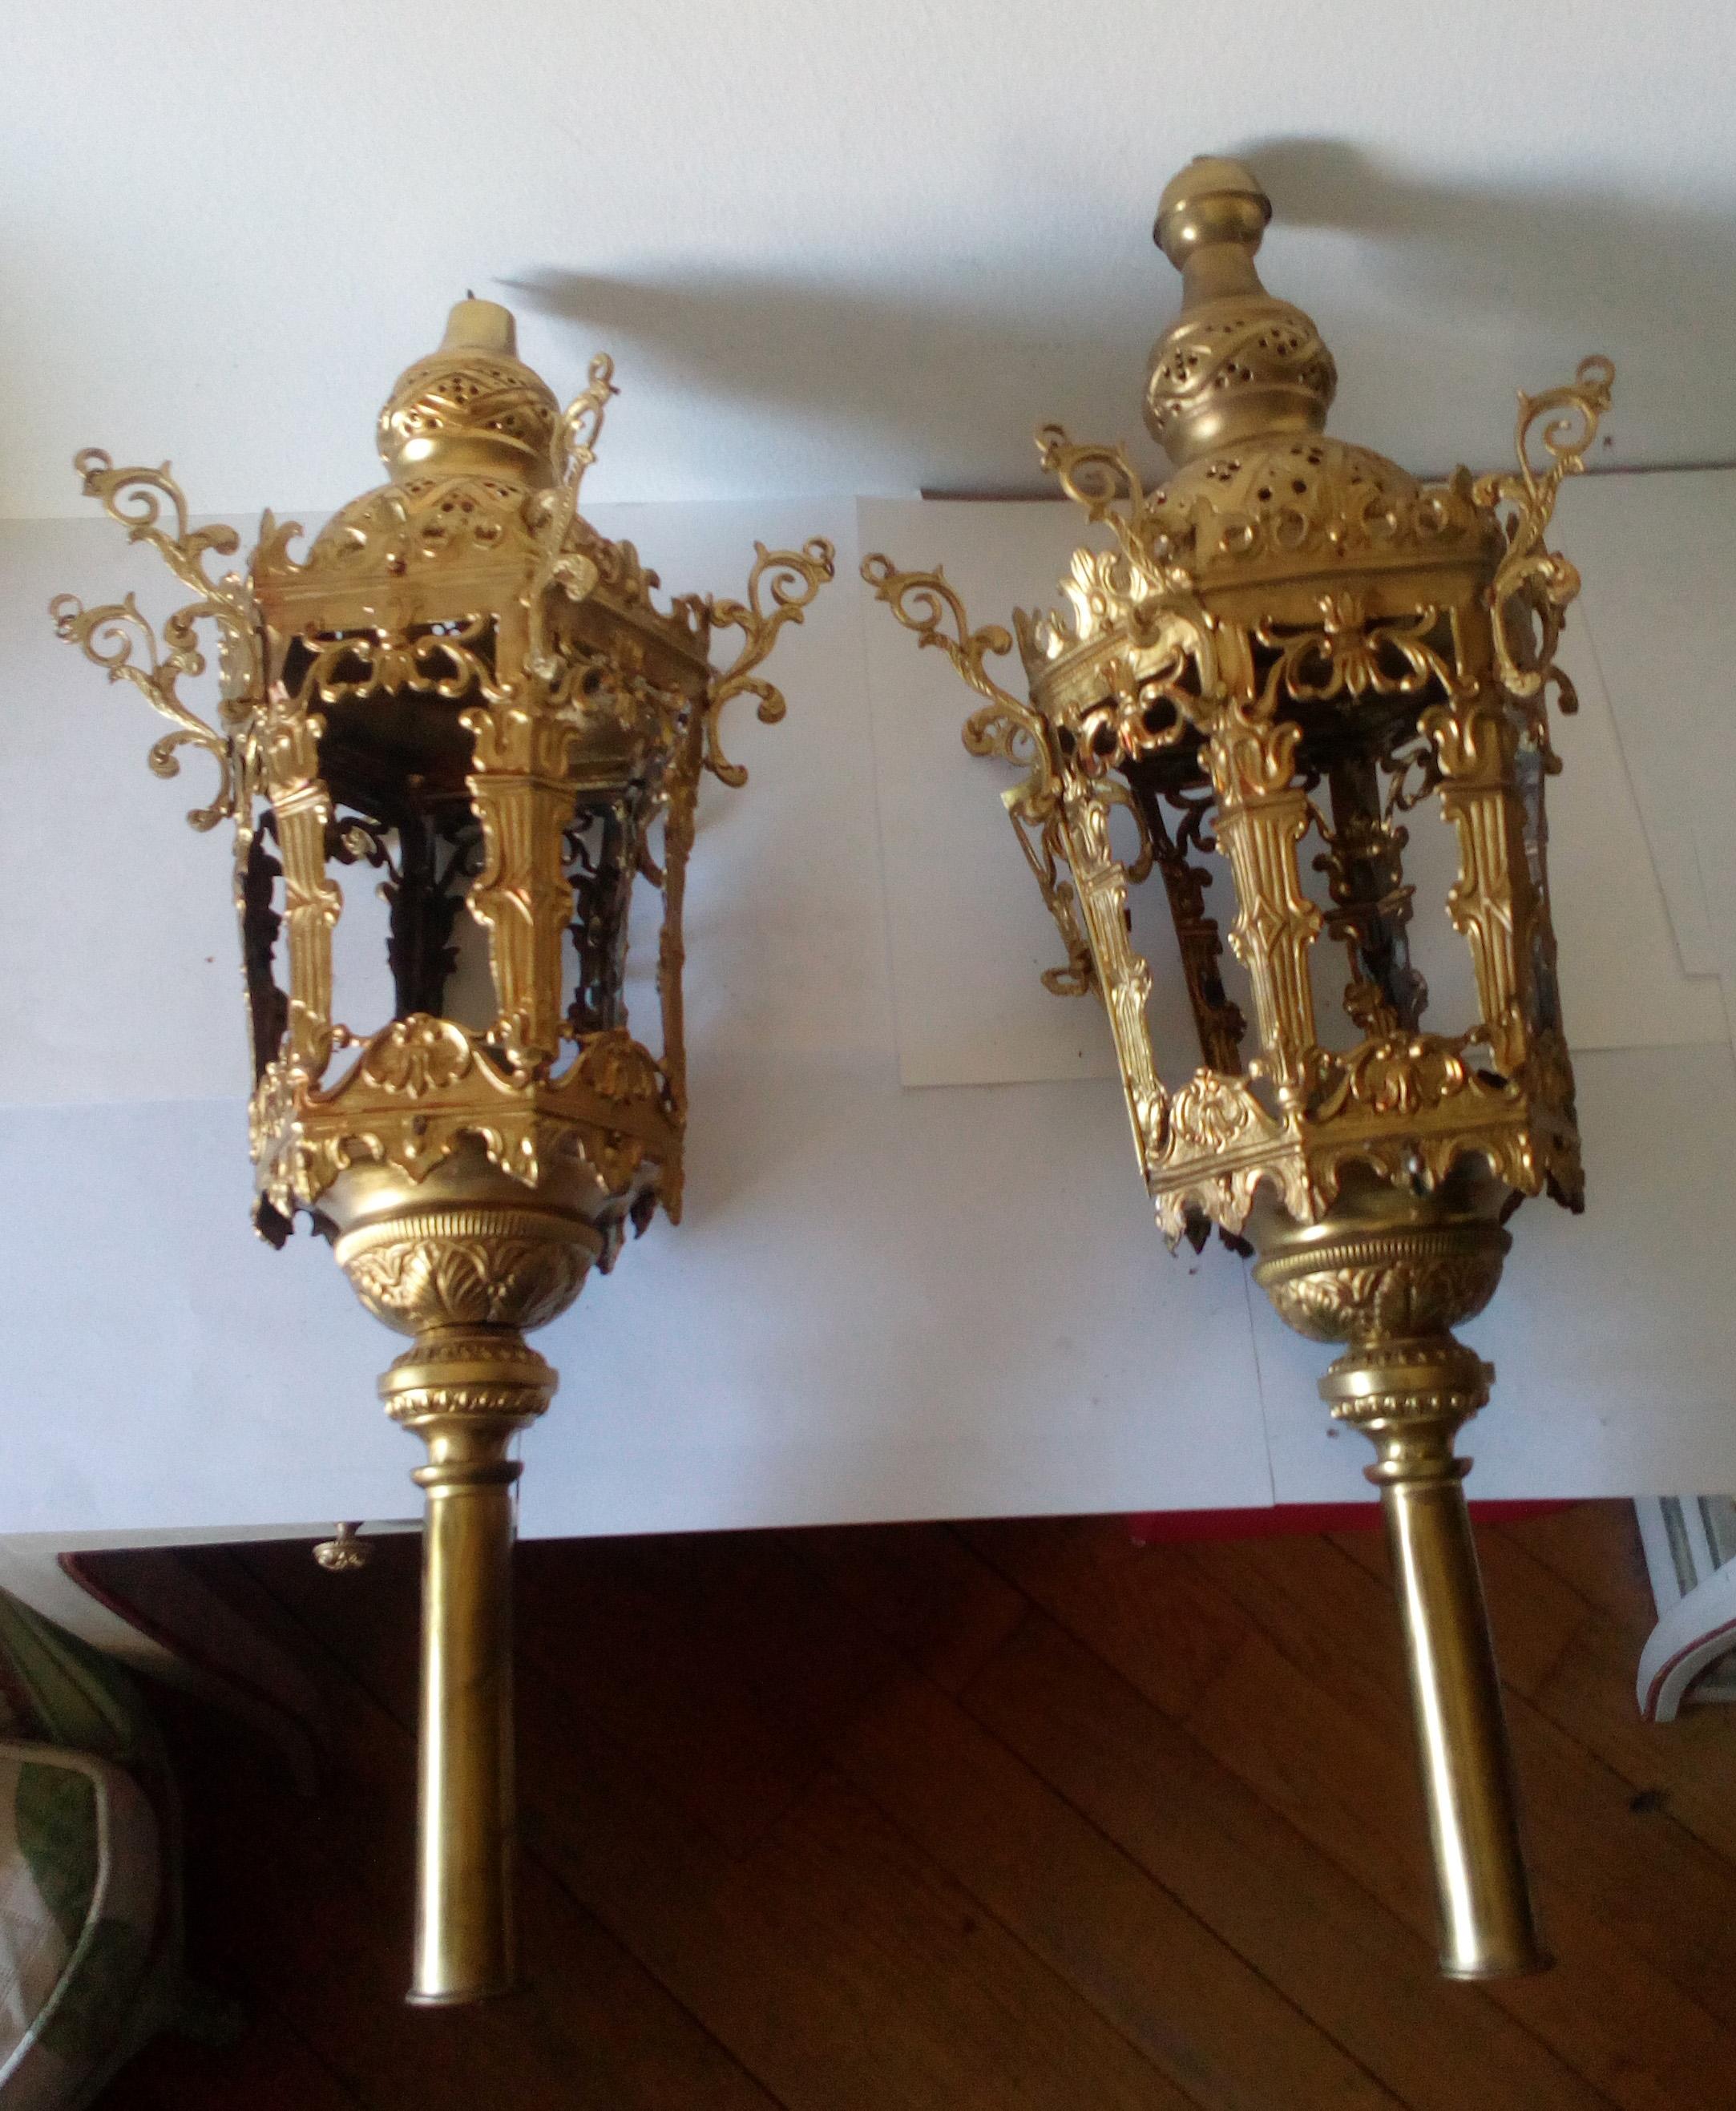 Pair of 19 century Italian processional lamps, made in brass 24-karat gold gilded
Measures: Height 74 cm
Diameter 31.